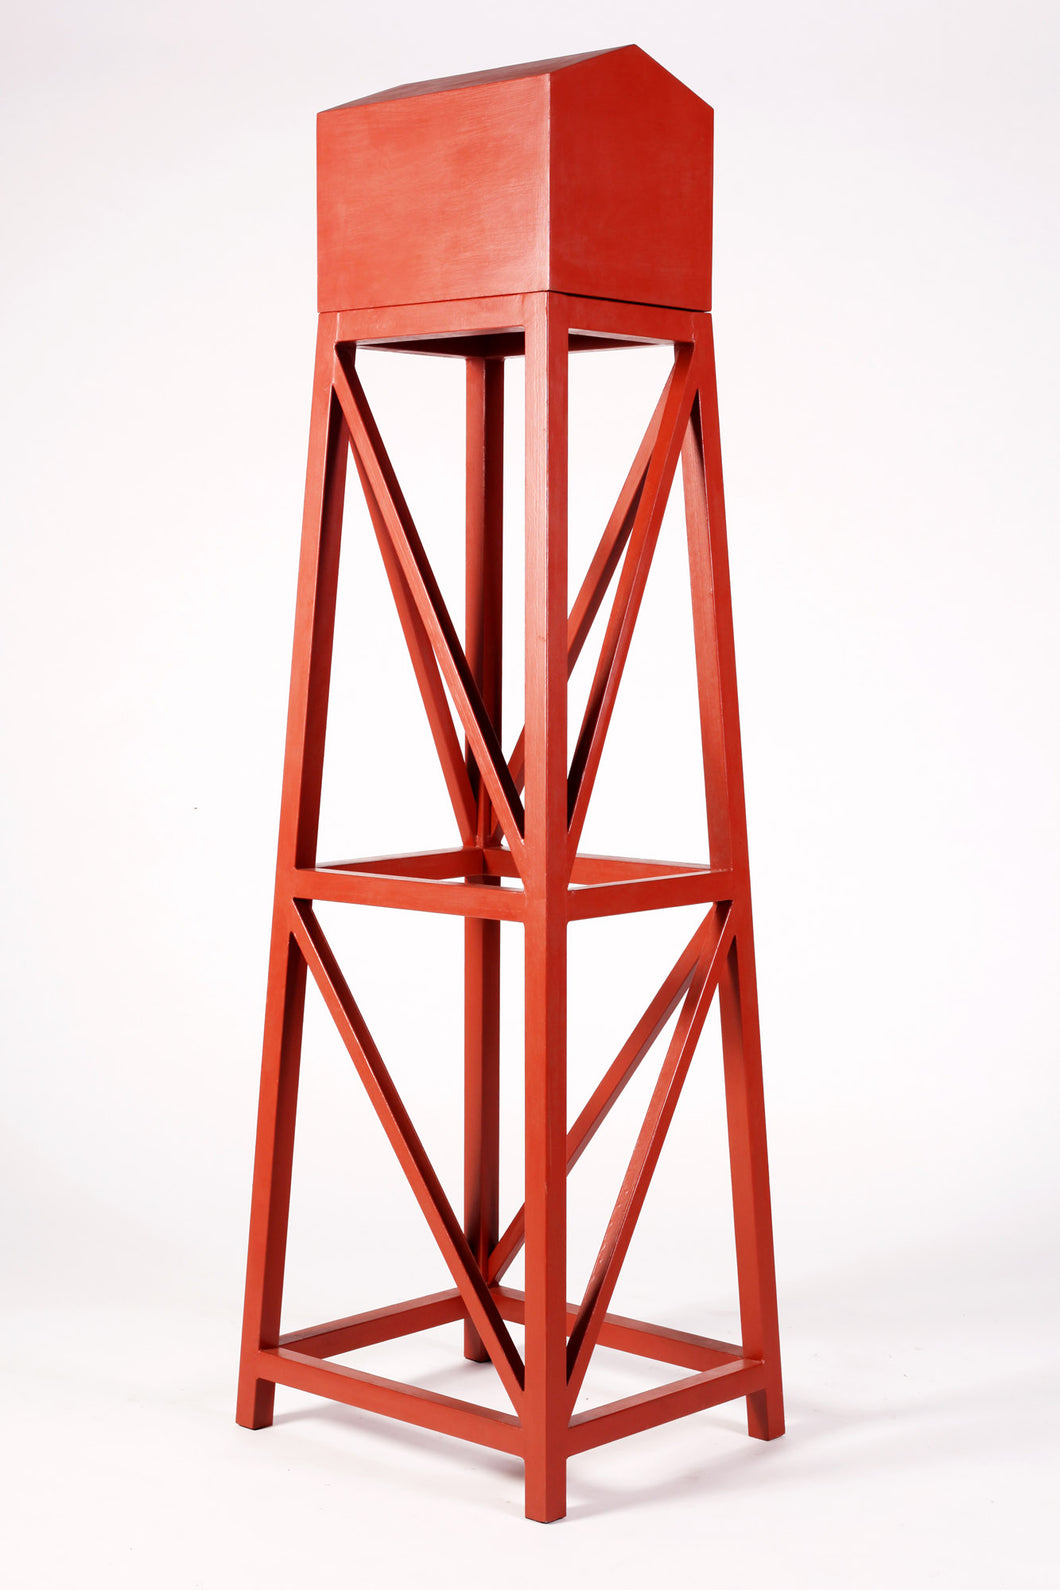 Jeremy Wafer | Tall Red Sculpture